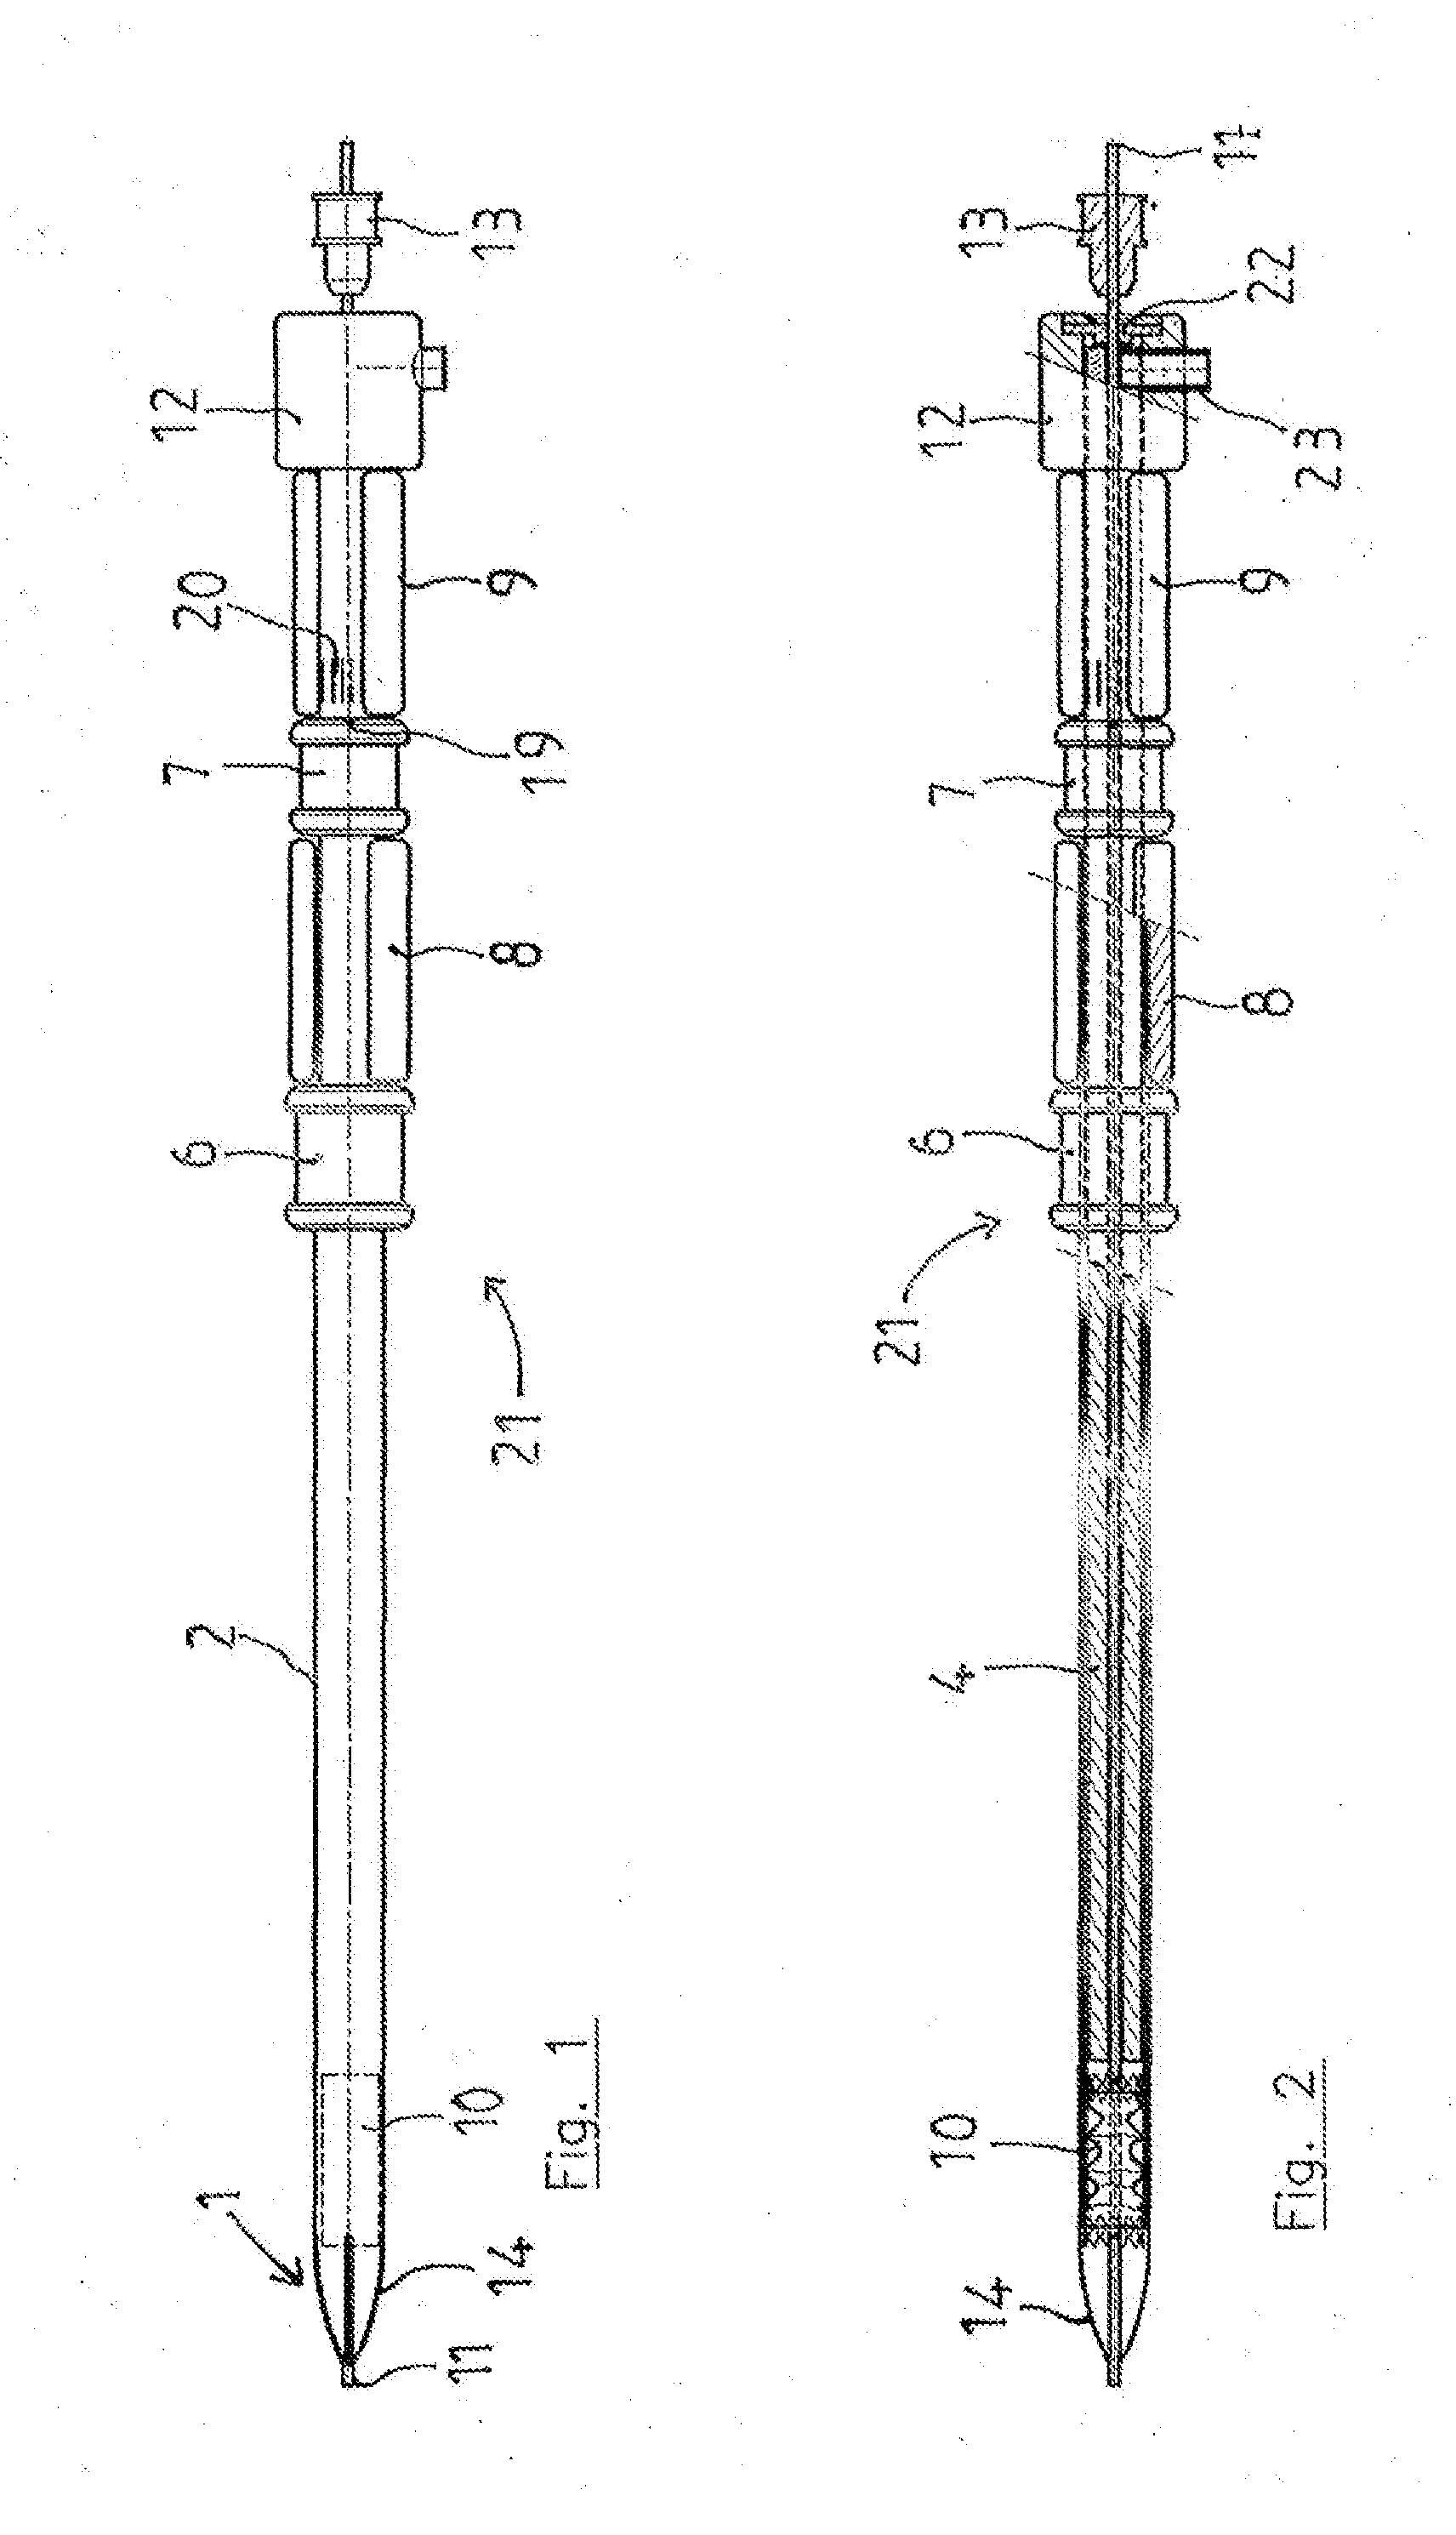 Device for placing a vascular implant